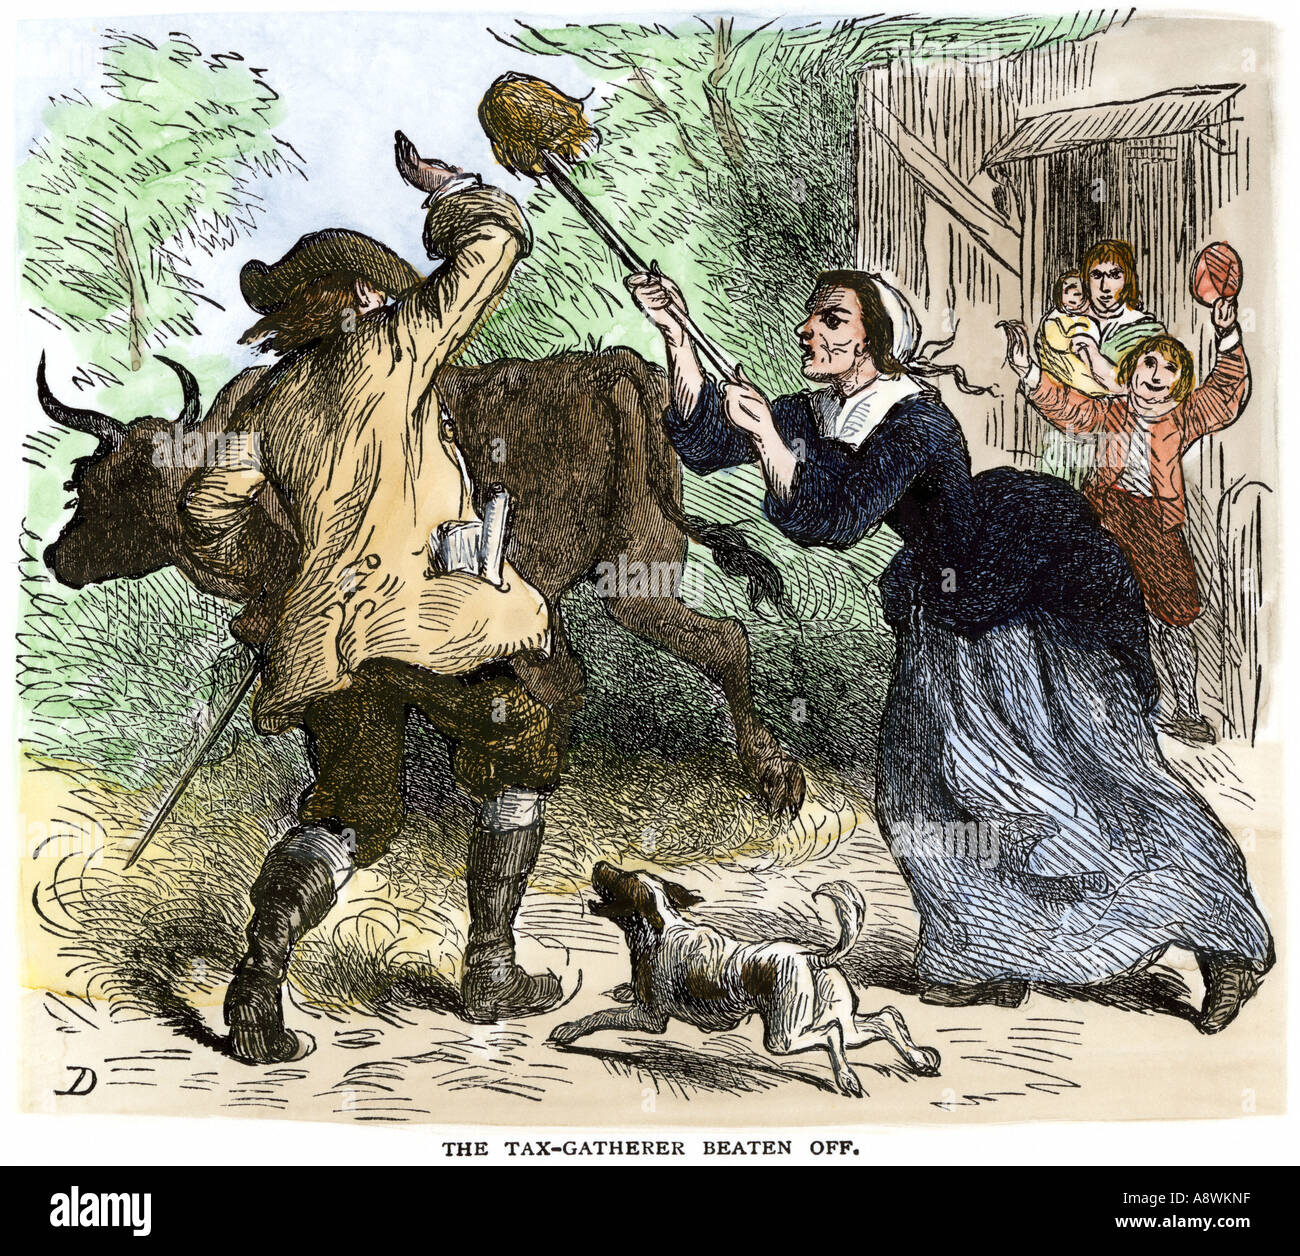 Tax collector beaten off by Carolina colonists 1700s. Hand-colored woodcut Stock Photo